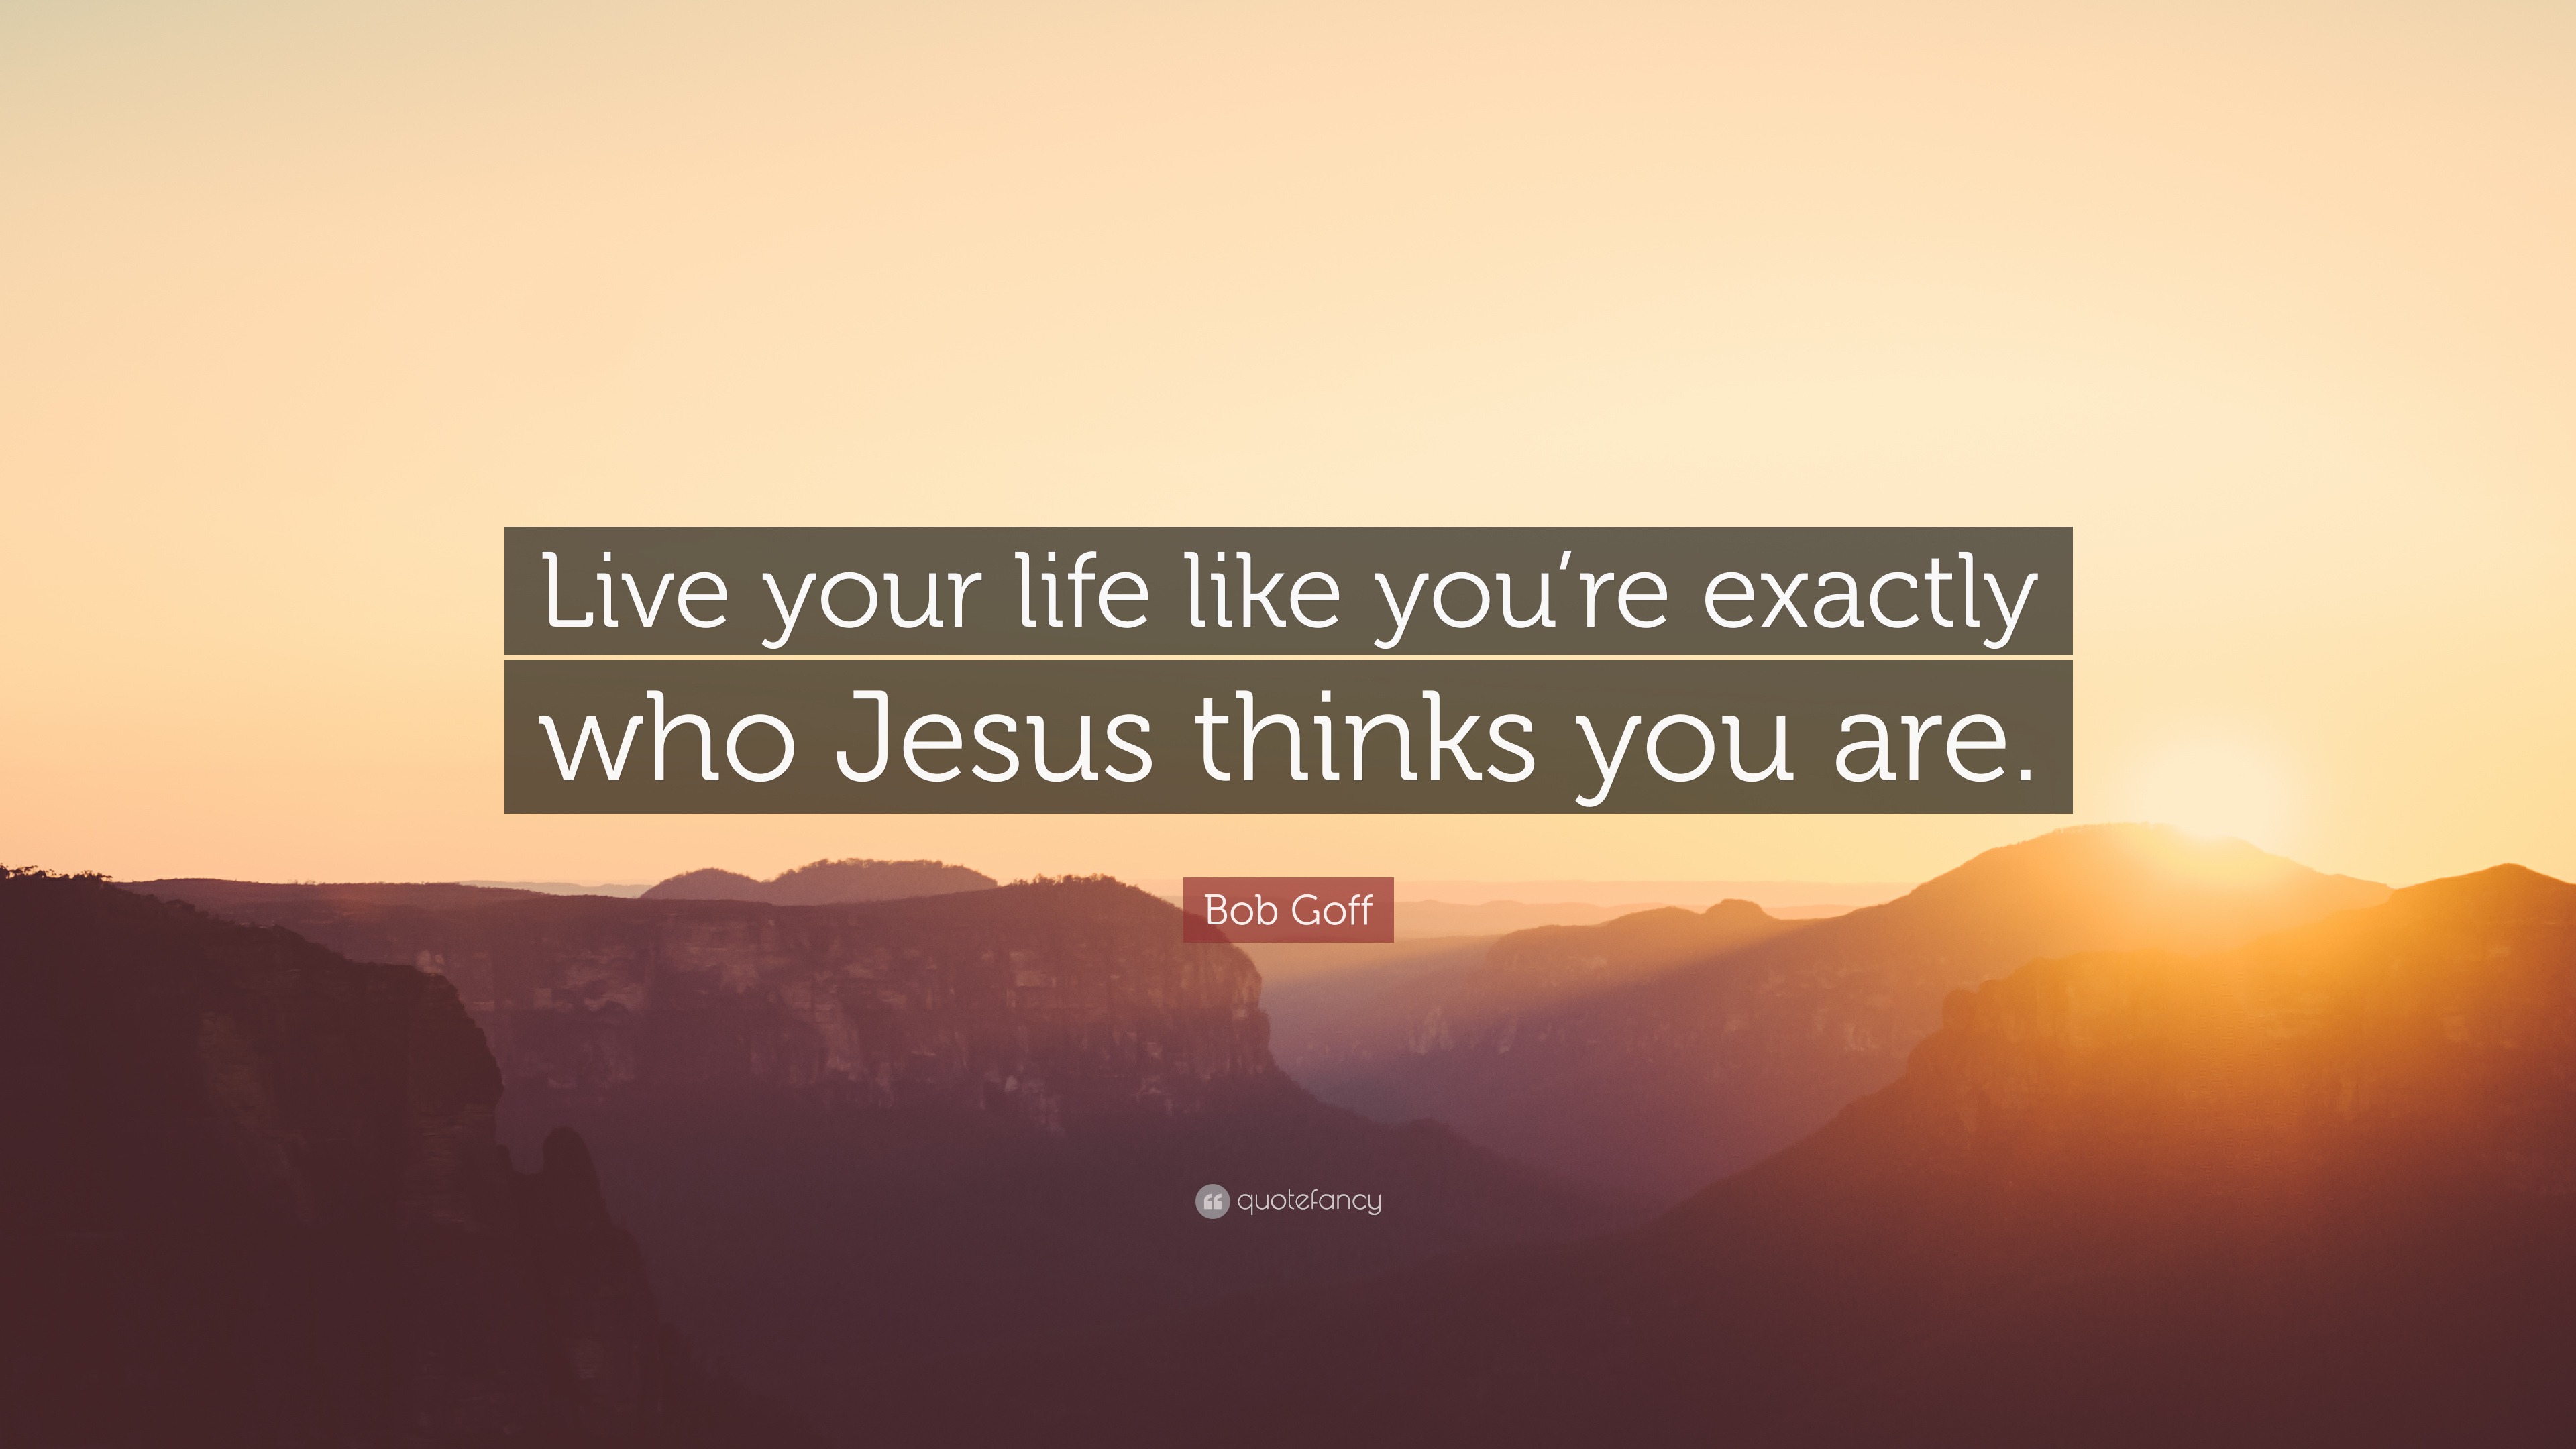 live life like quotes bob goff quote u201clive your life like you u0027re exactly who jesus